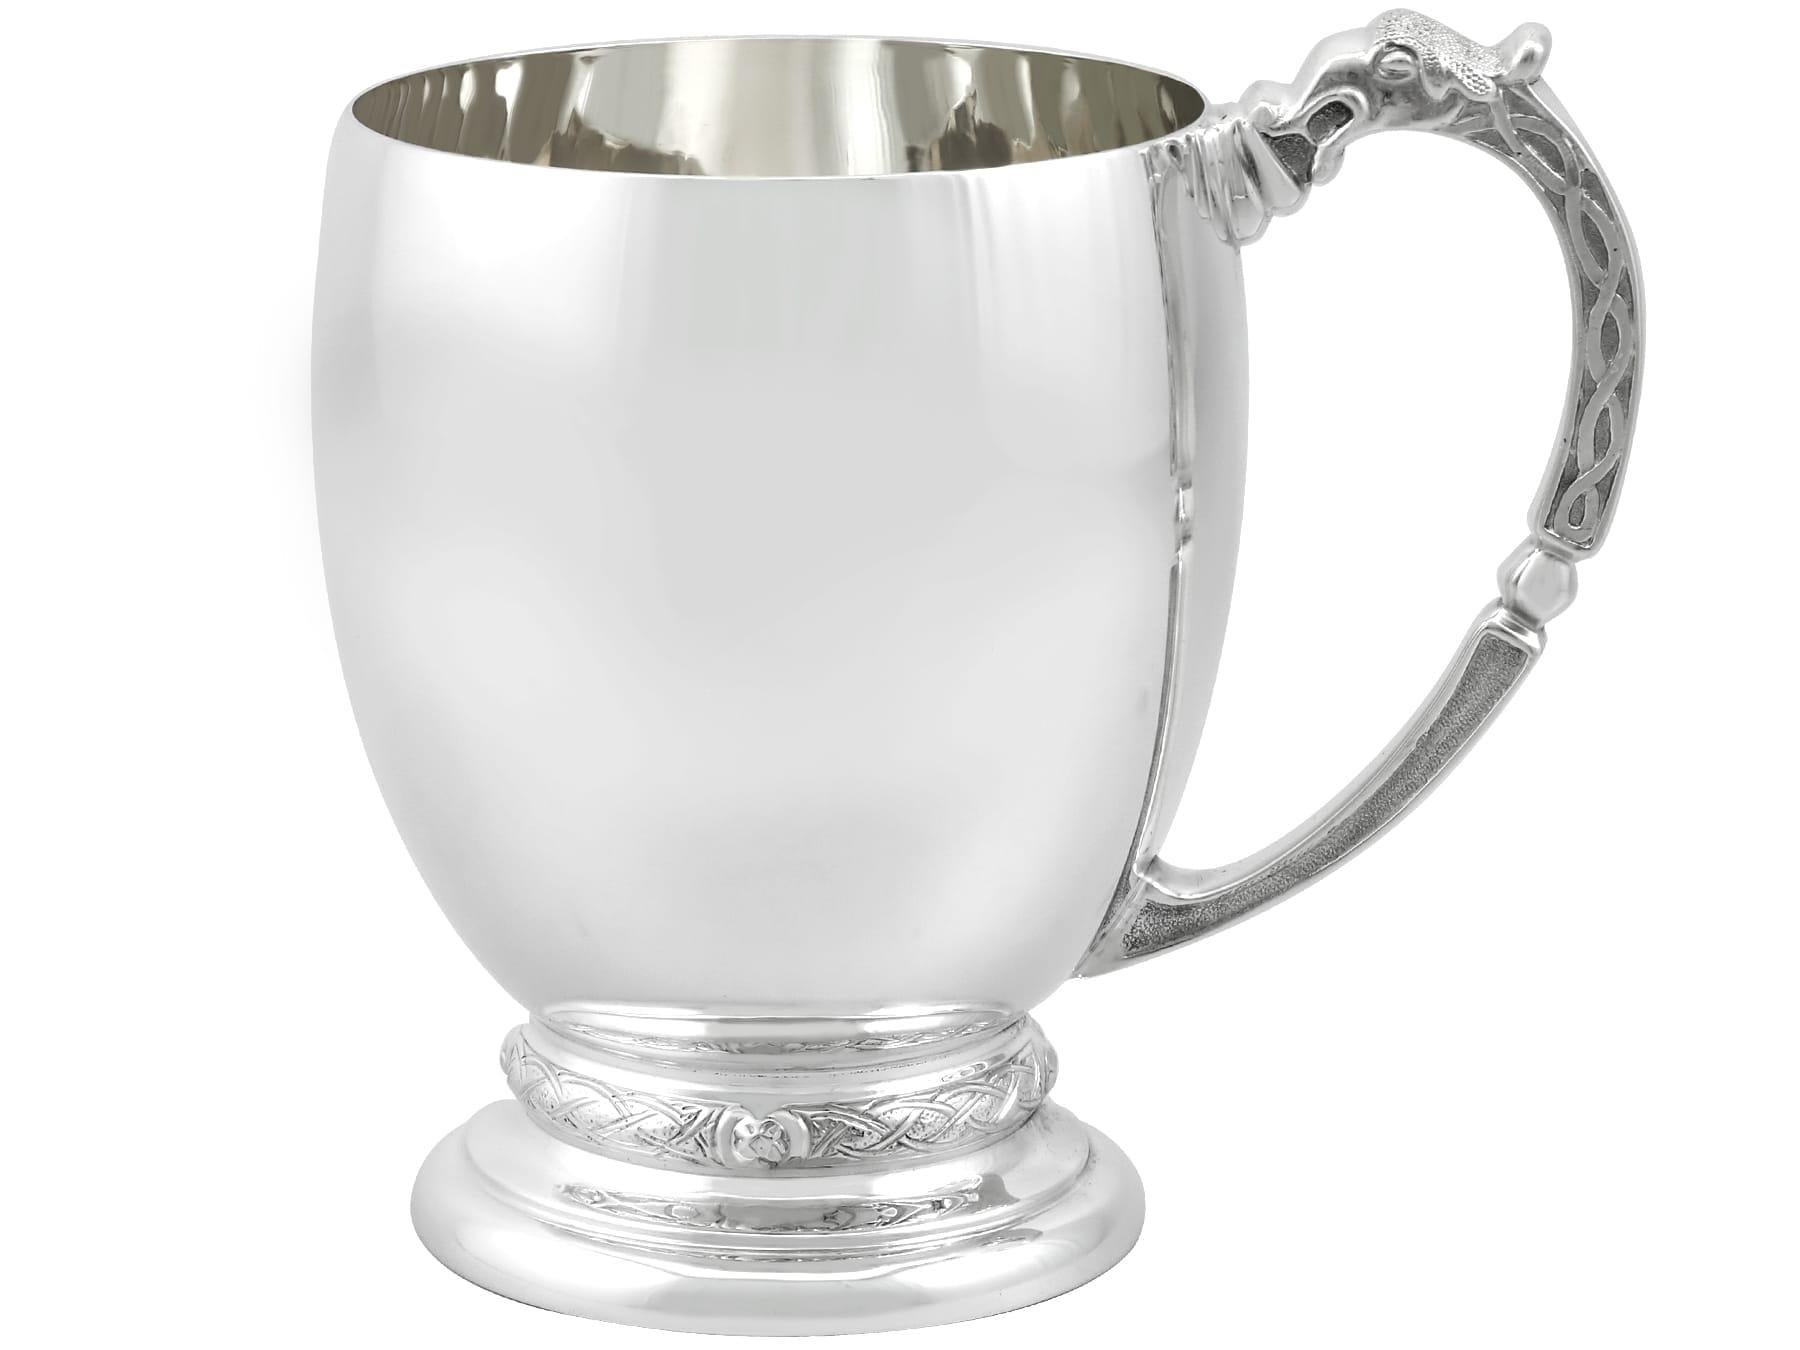 Vintage Lindisfarne Style 1960's Sterling Silver Pint Mug In Excellent Condition For Sale In Jesmond, Newcastle Upon Tyne